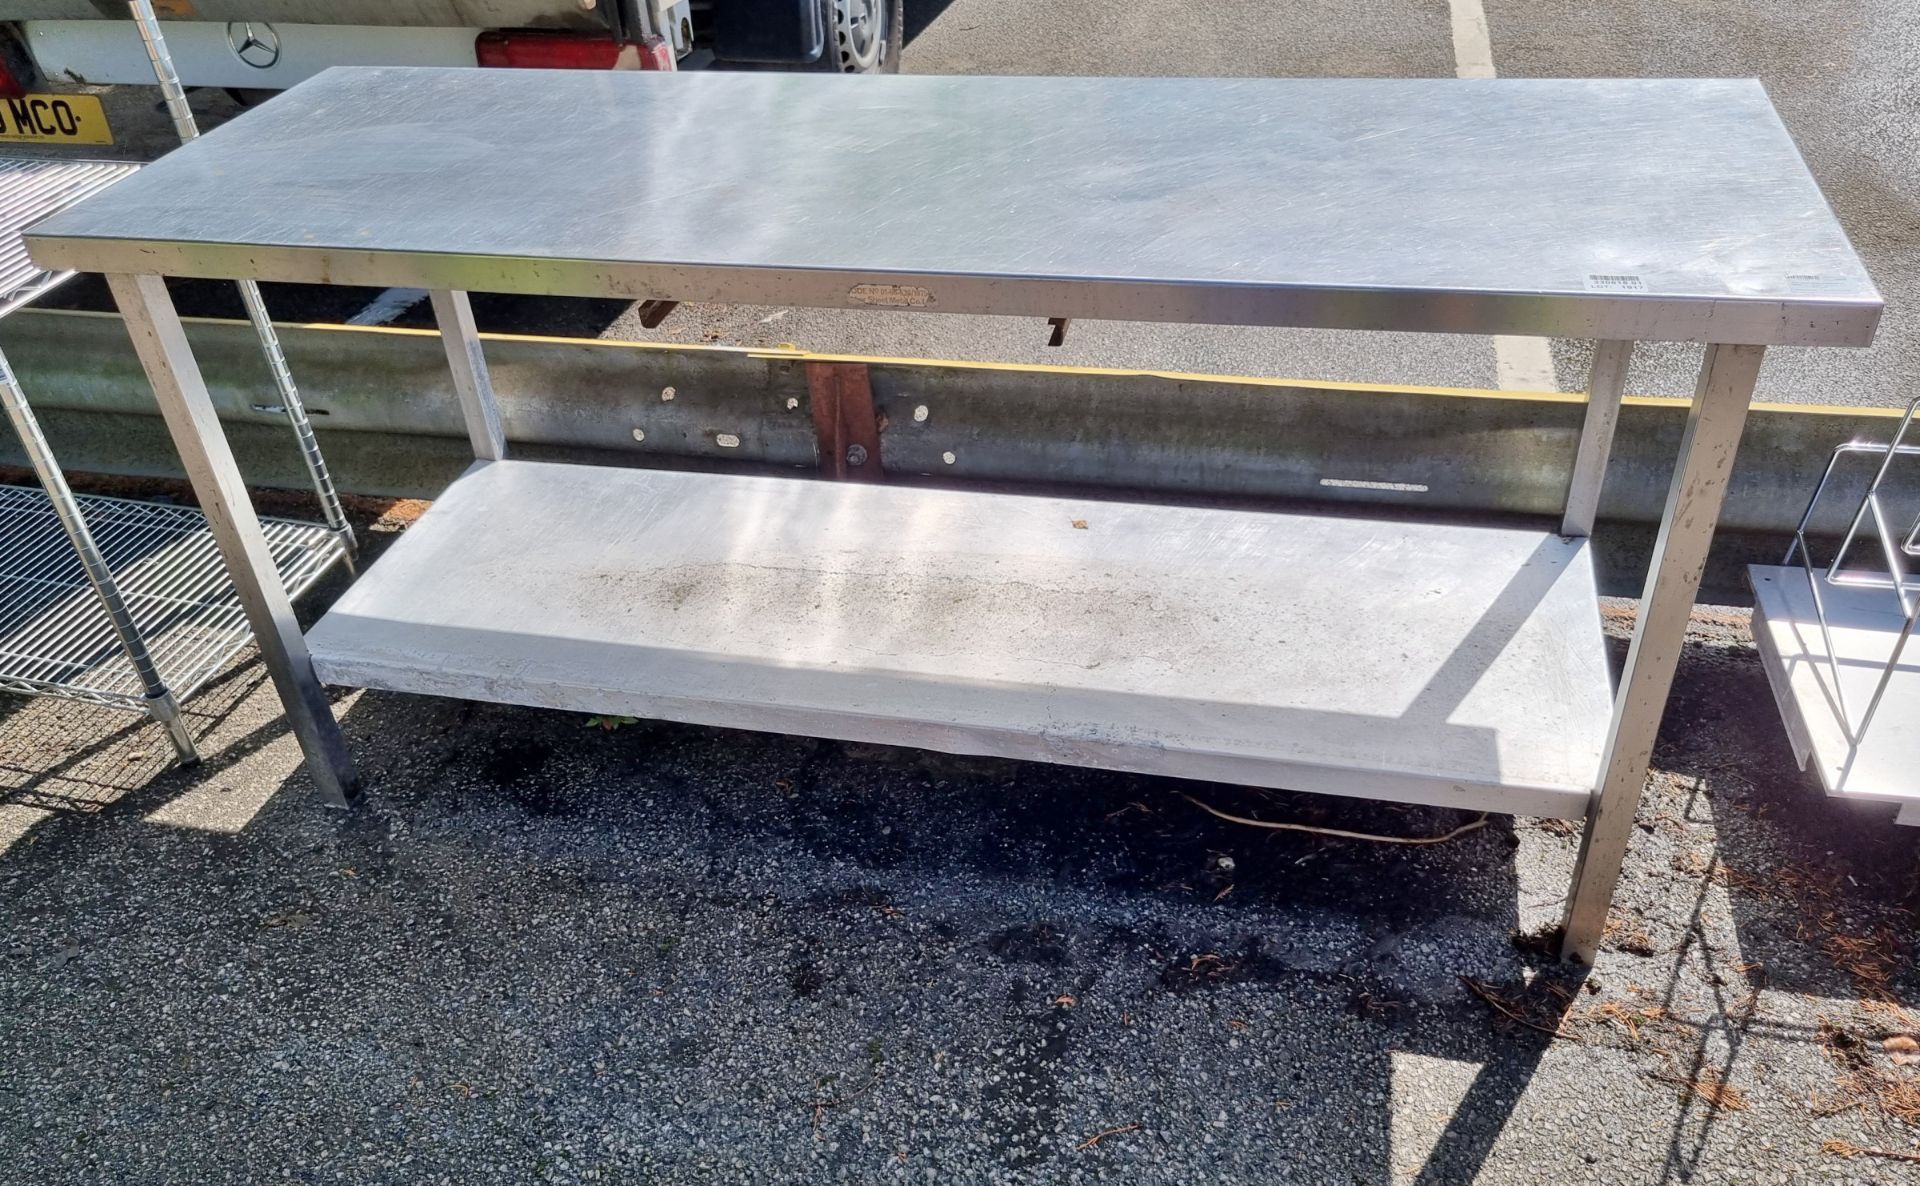 Stainless steel preparation table - L 1830 x W 610 x H 830mm